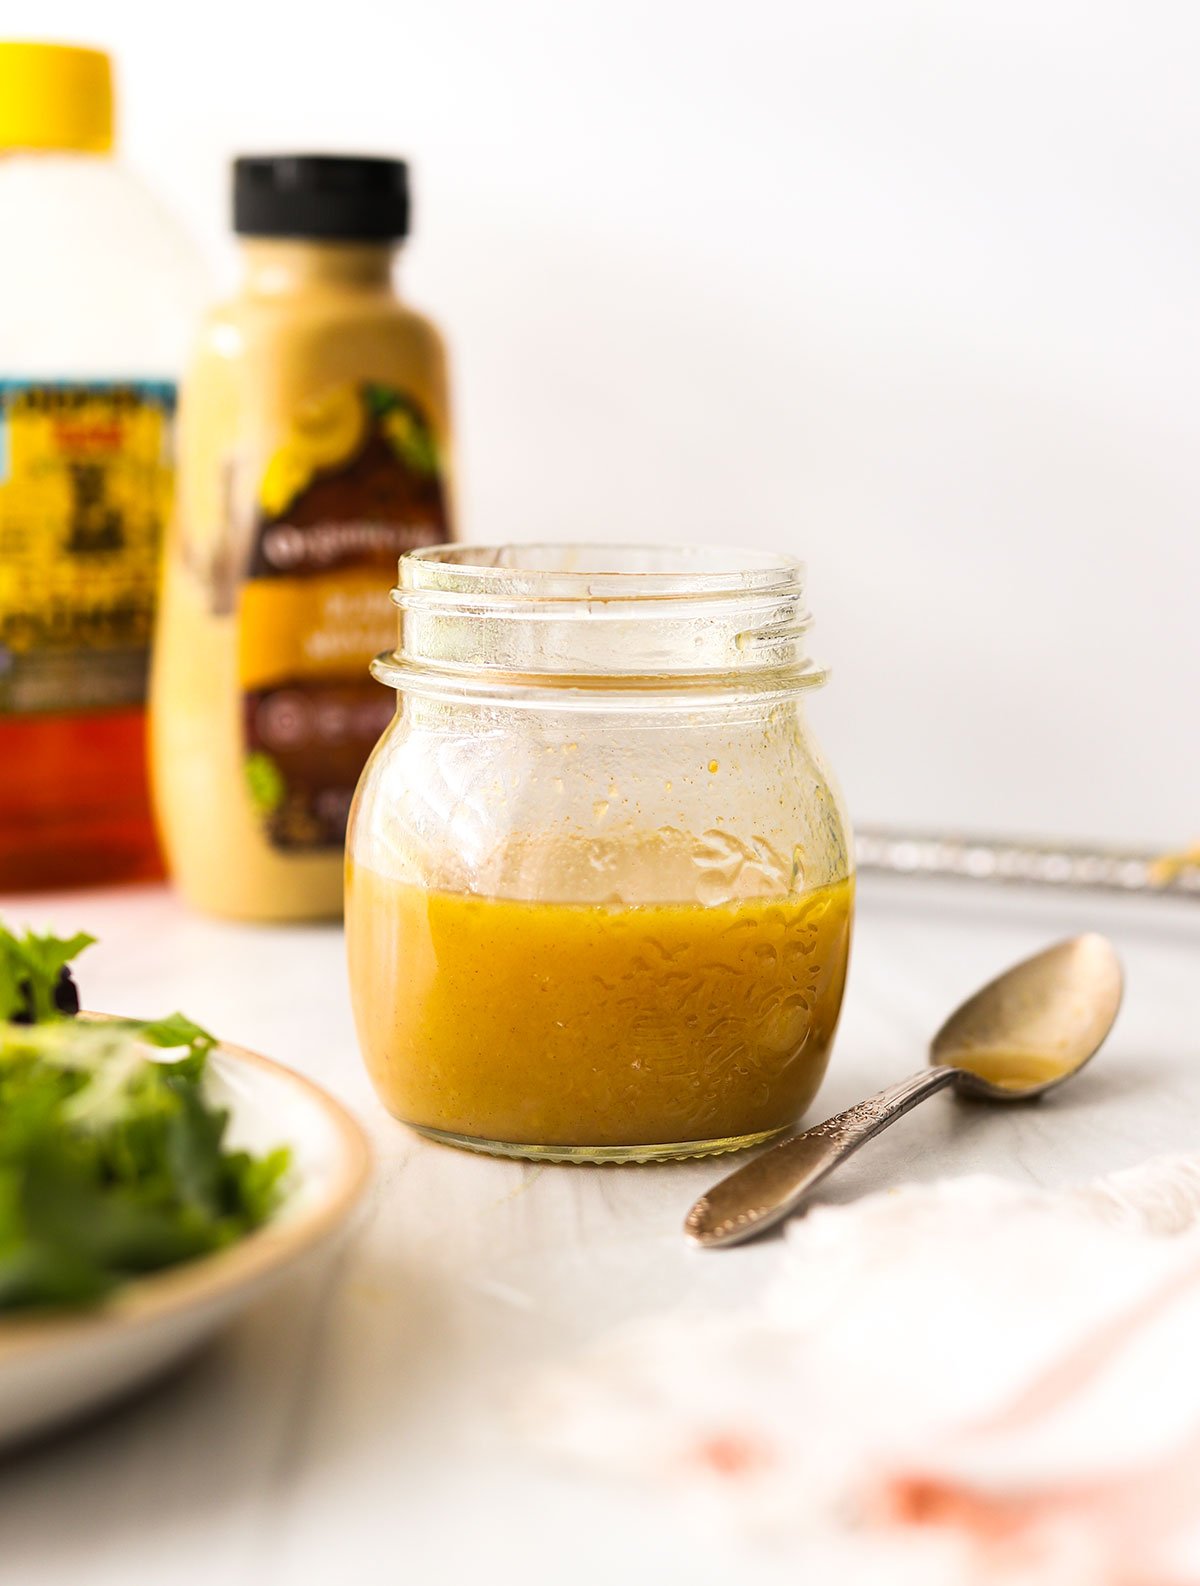 honey dijon salad dressing in a glass jar with a spoon next to it.